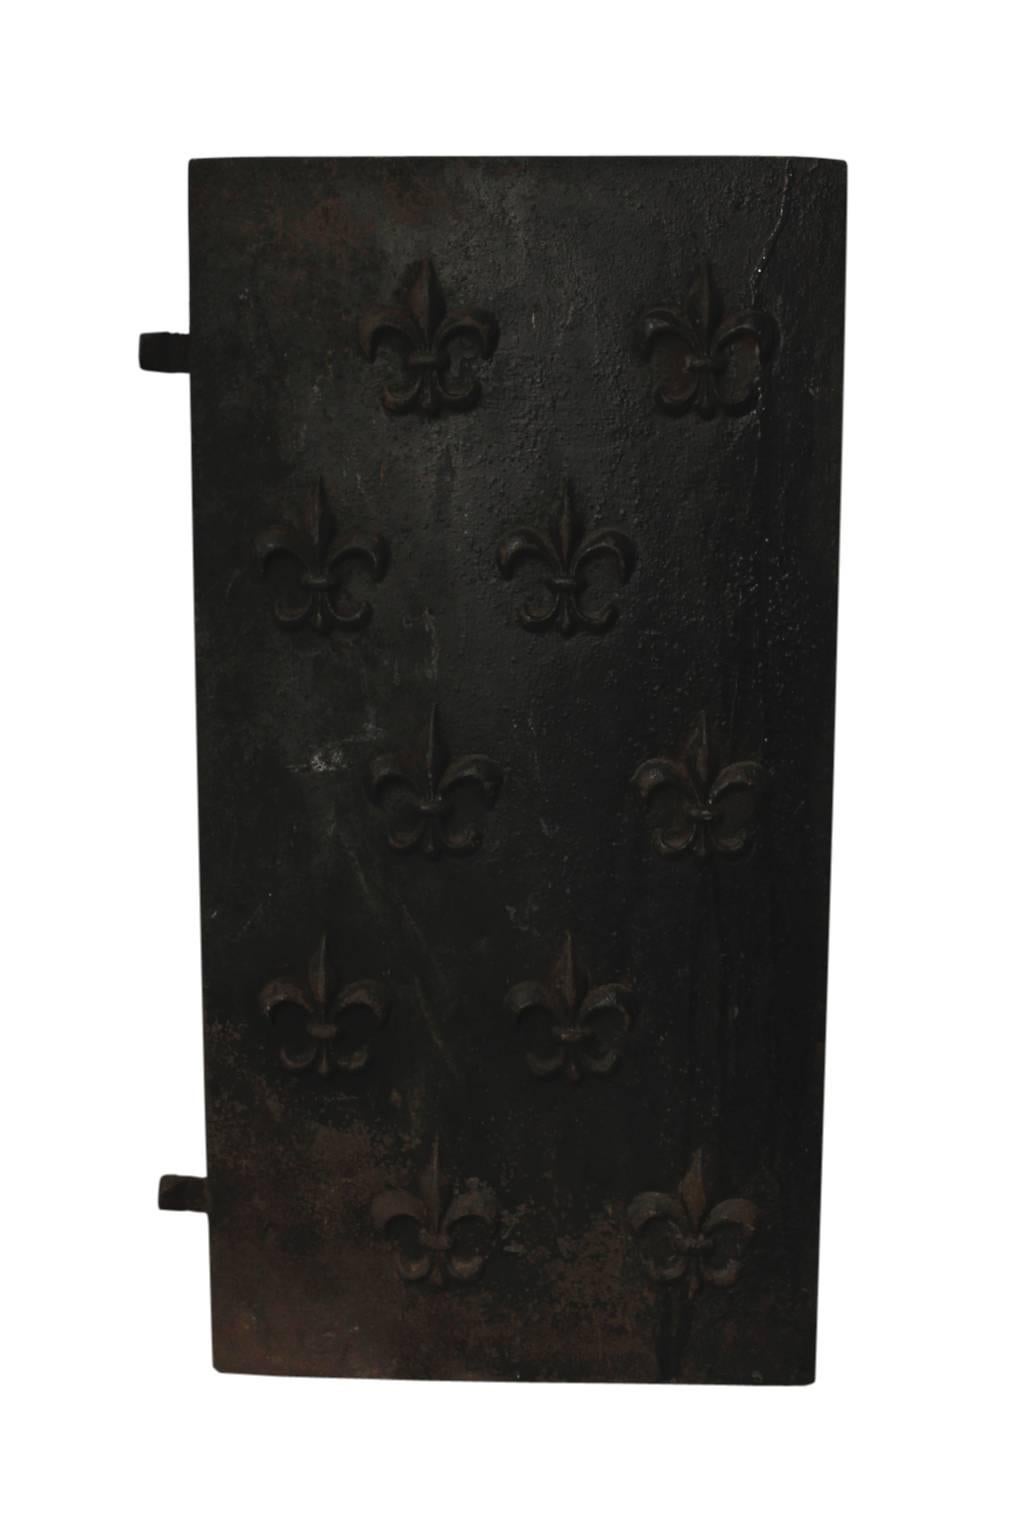 A rustic, cast iron fireplace liner, with fleur-de-lis relief pattern. The three pieces fit together via wedges on the outer panels, which fit into notches on the middle panel. Individually, the dimensions of the outer panels are 15